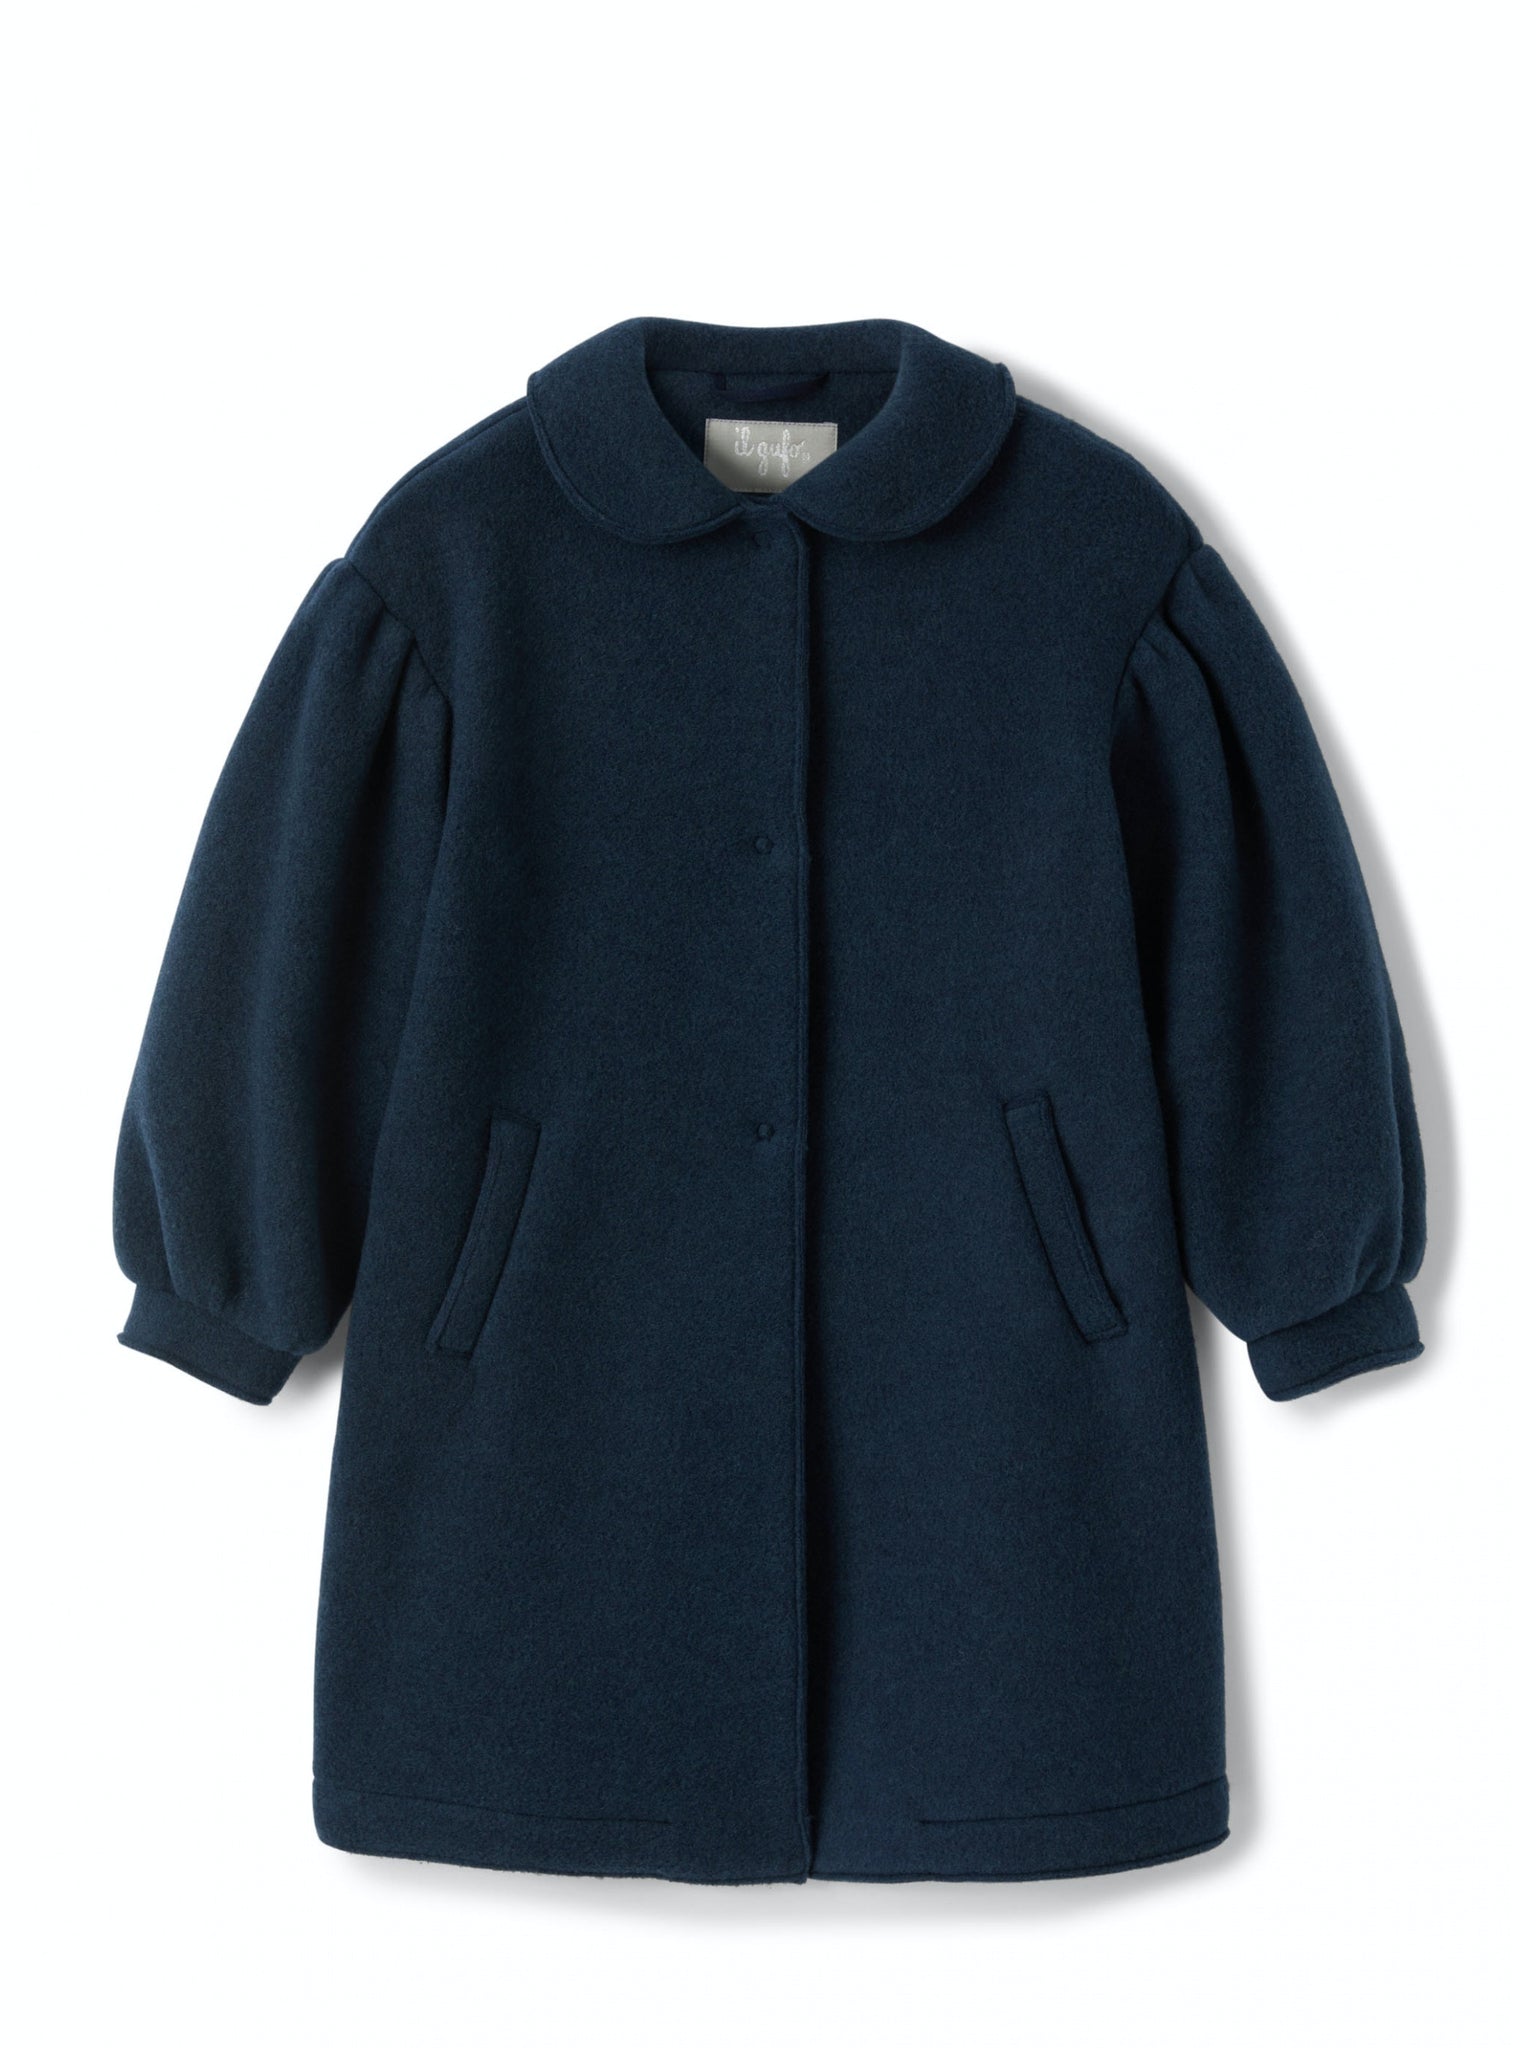 GIRLS BUTTON UP COAT W/PUFFY SLEEVES, DRK BLUE